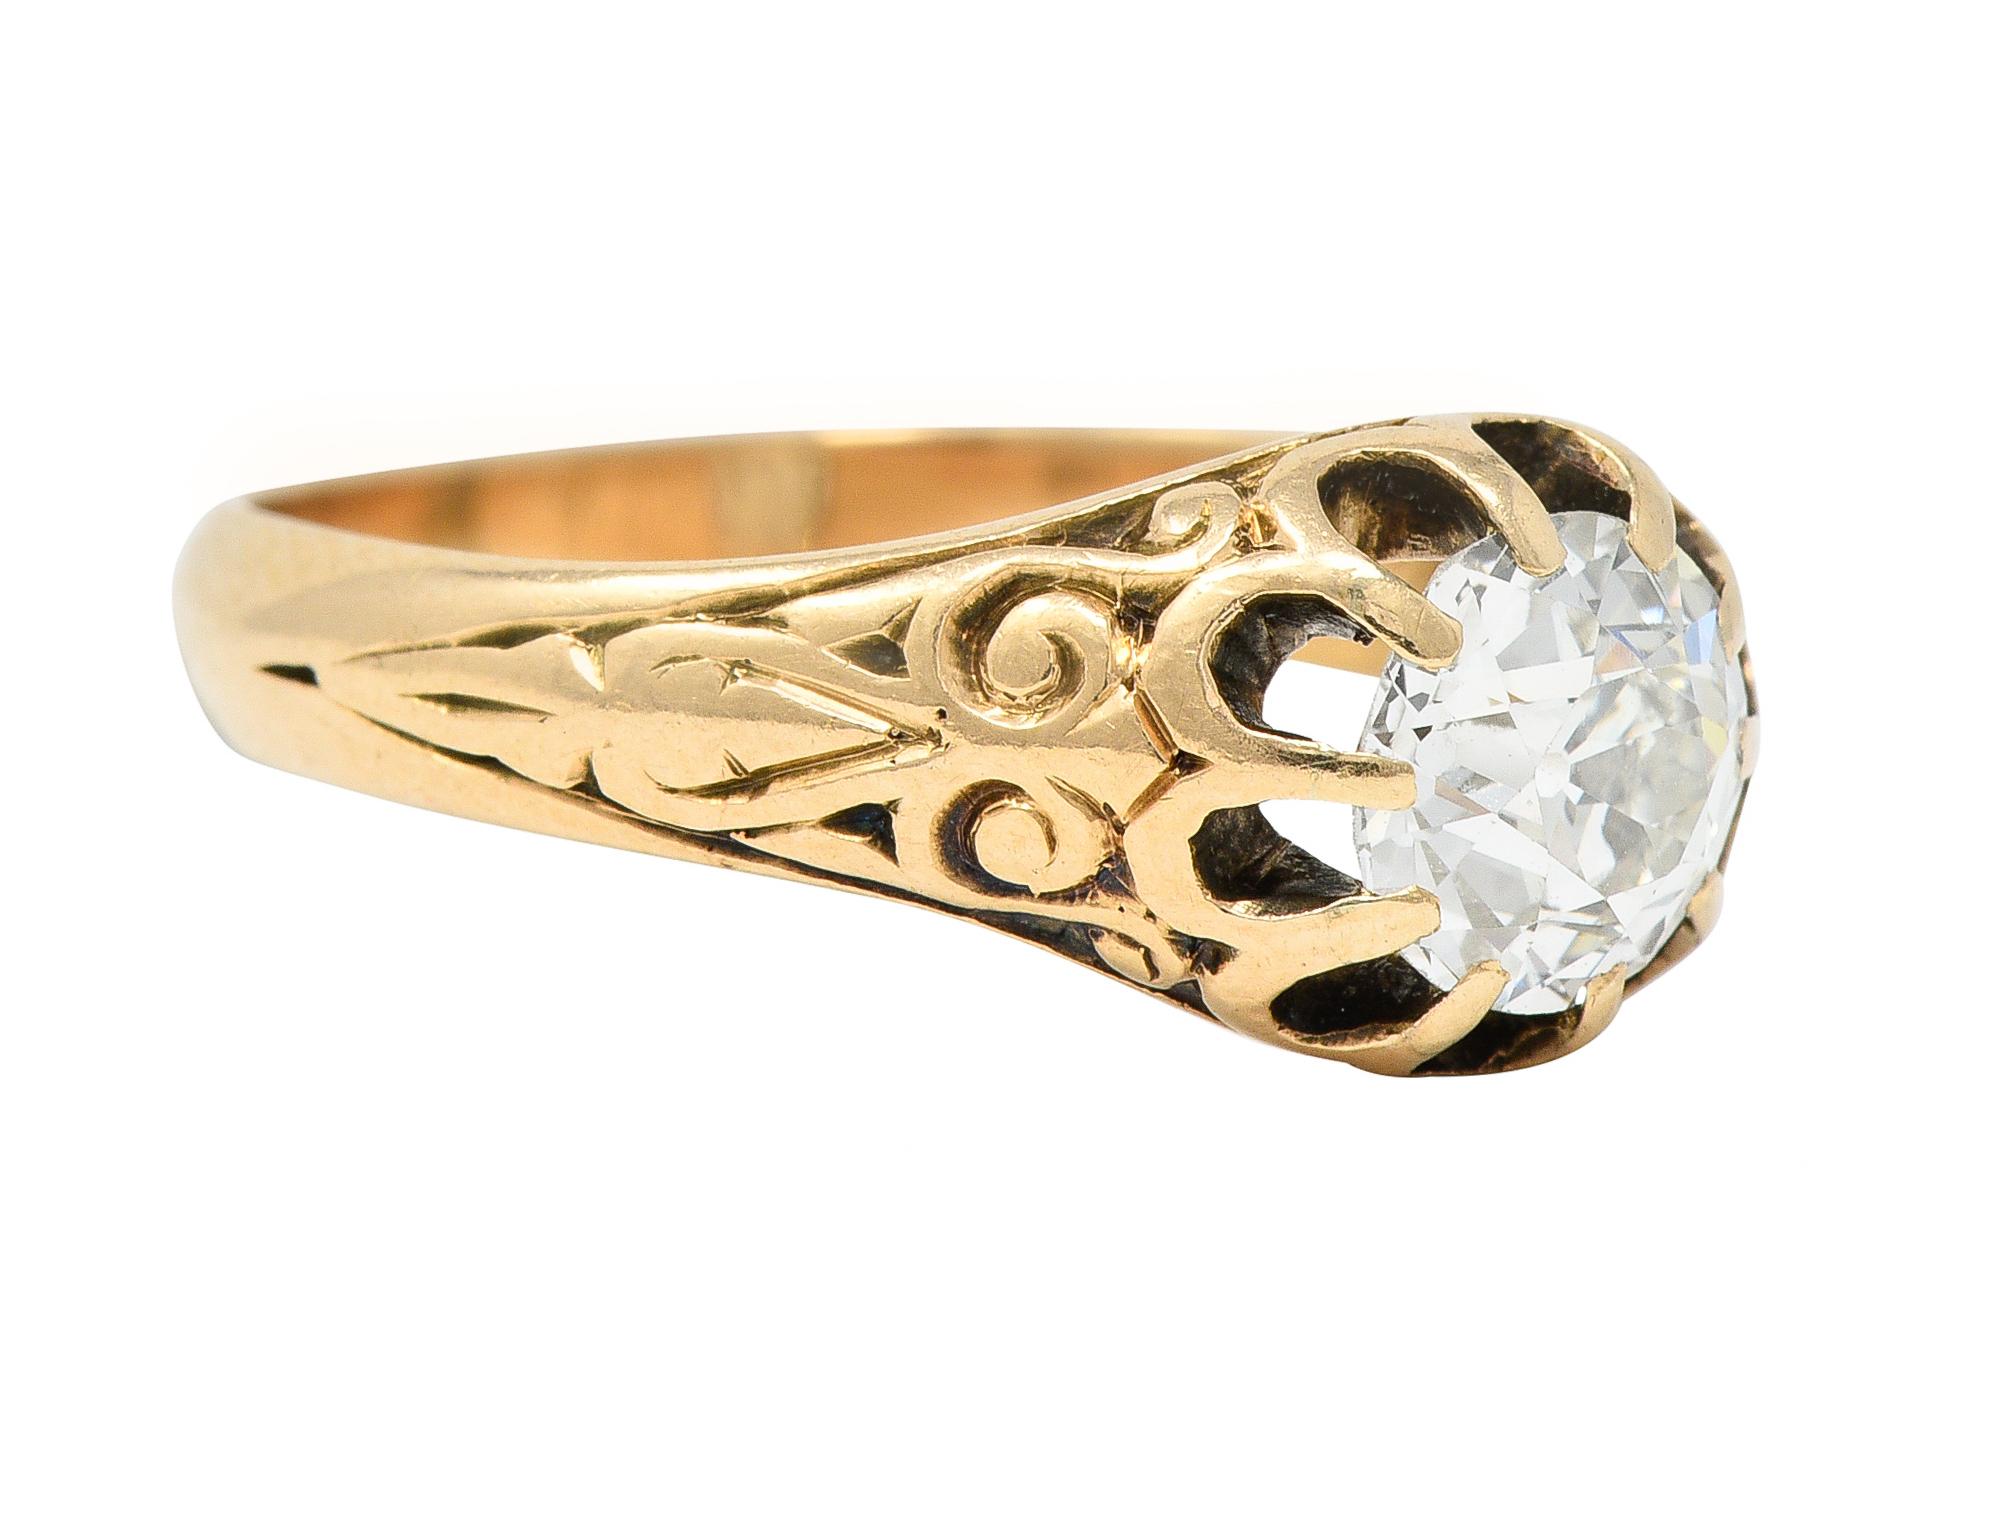 Centering an old European cut diamond weighing approximately 0.86 carat
I color with VS1 clarity - set with belcher style prongs
Flanked by grooved scroll and foliate motif shoulders
Stamped 14k for 14 karat gold
Circa: 1880's
Ring size: 5 1/4 and